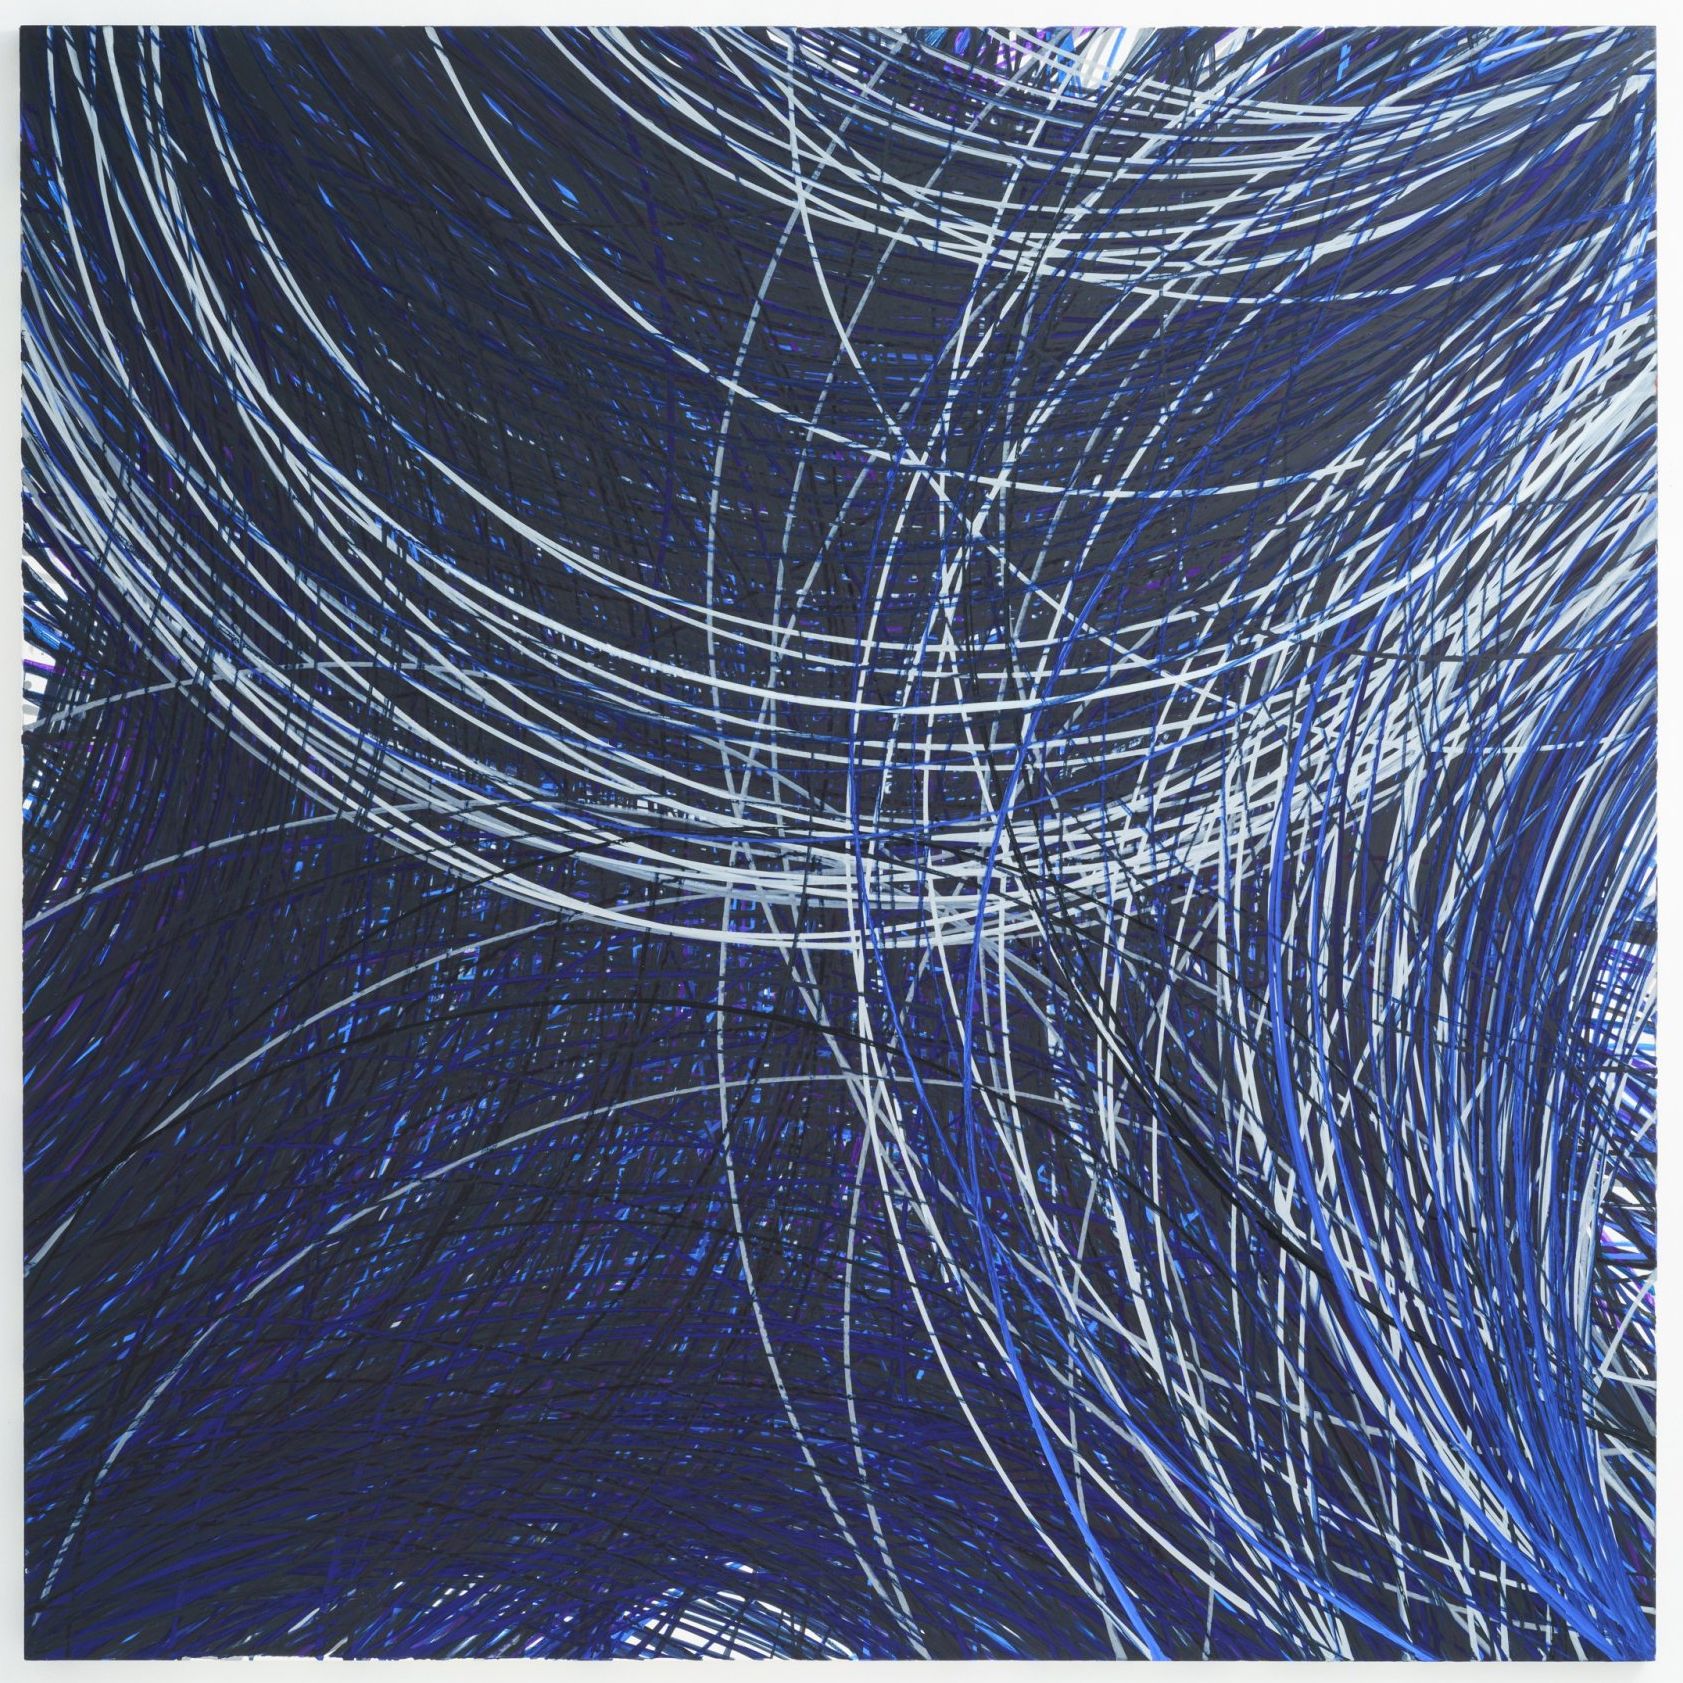 Painting by Japanese artist Mayu Kunihisa. Large canvas featuring arcs in black, blue, and white on a midnight blue background.